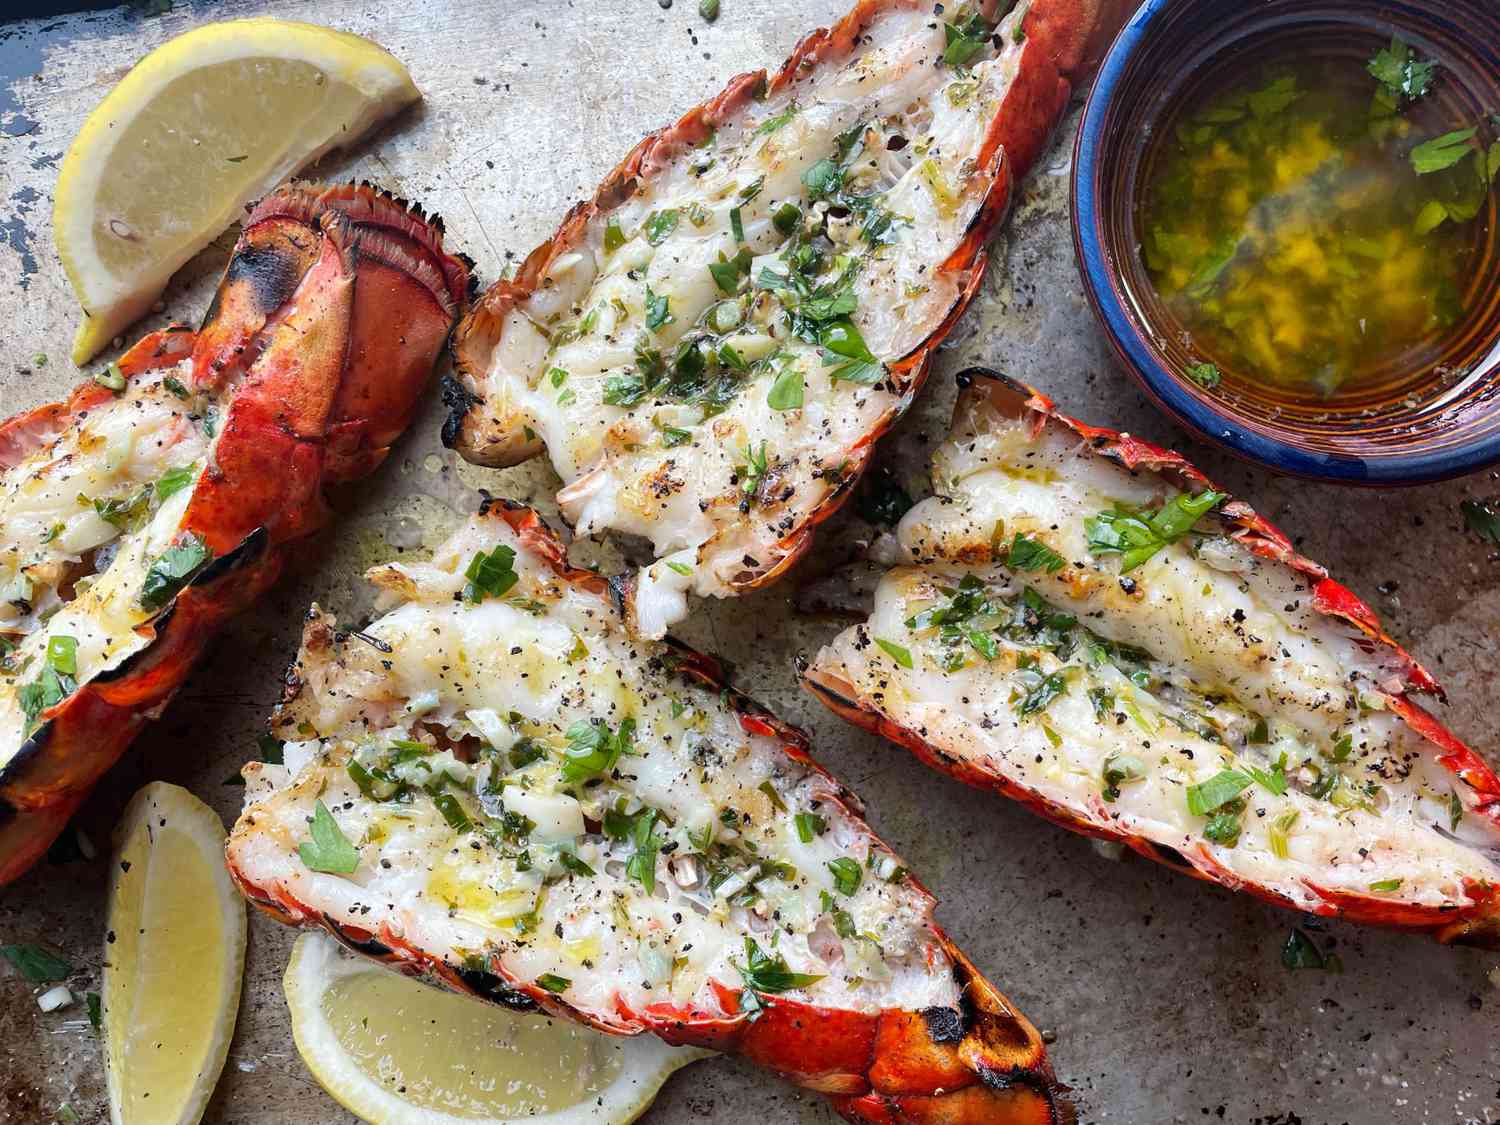 Grilled lobster tails with lemons and garlic butter